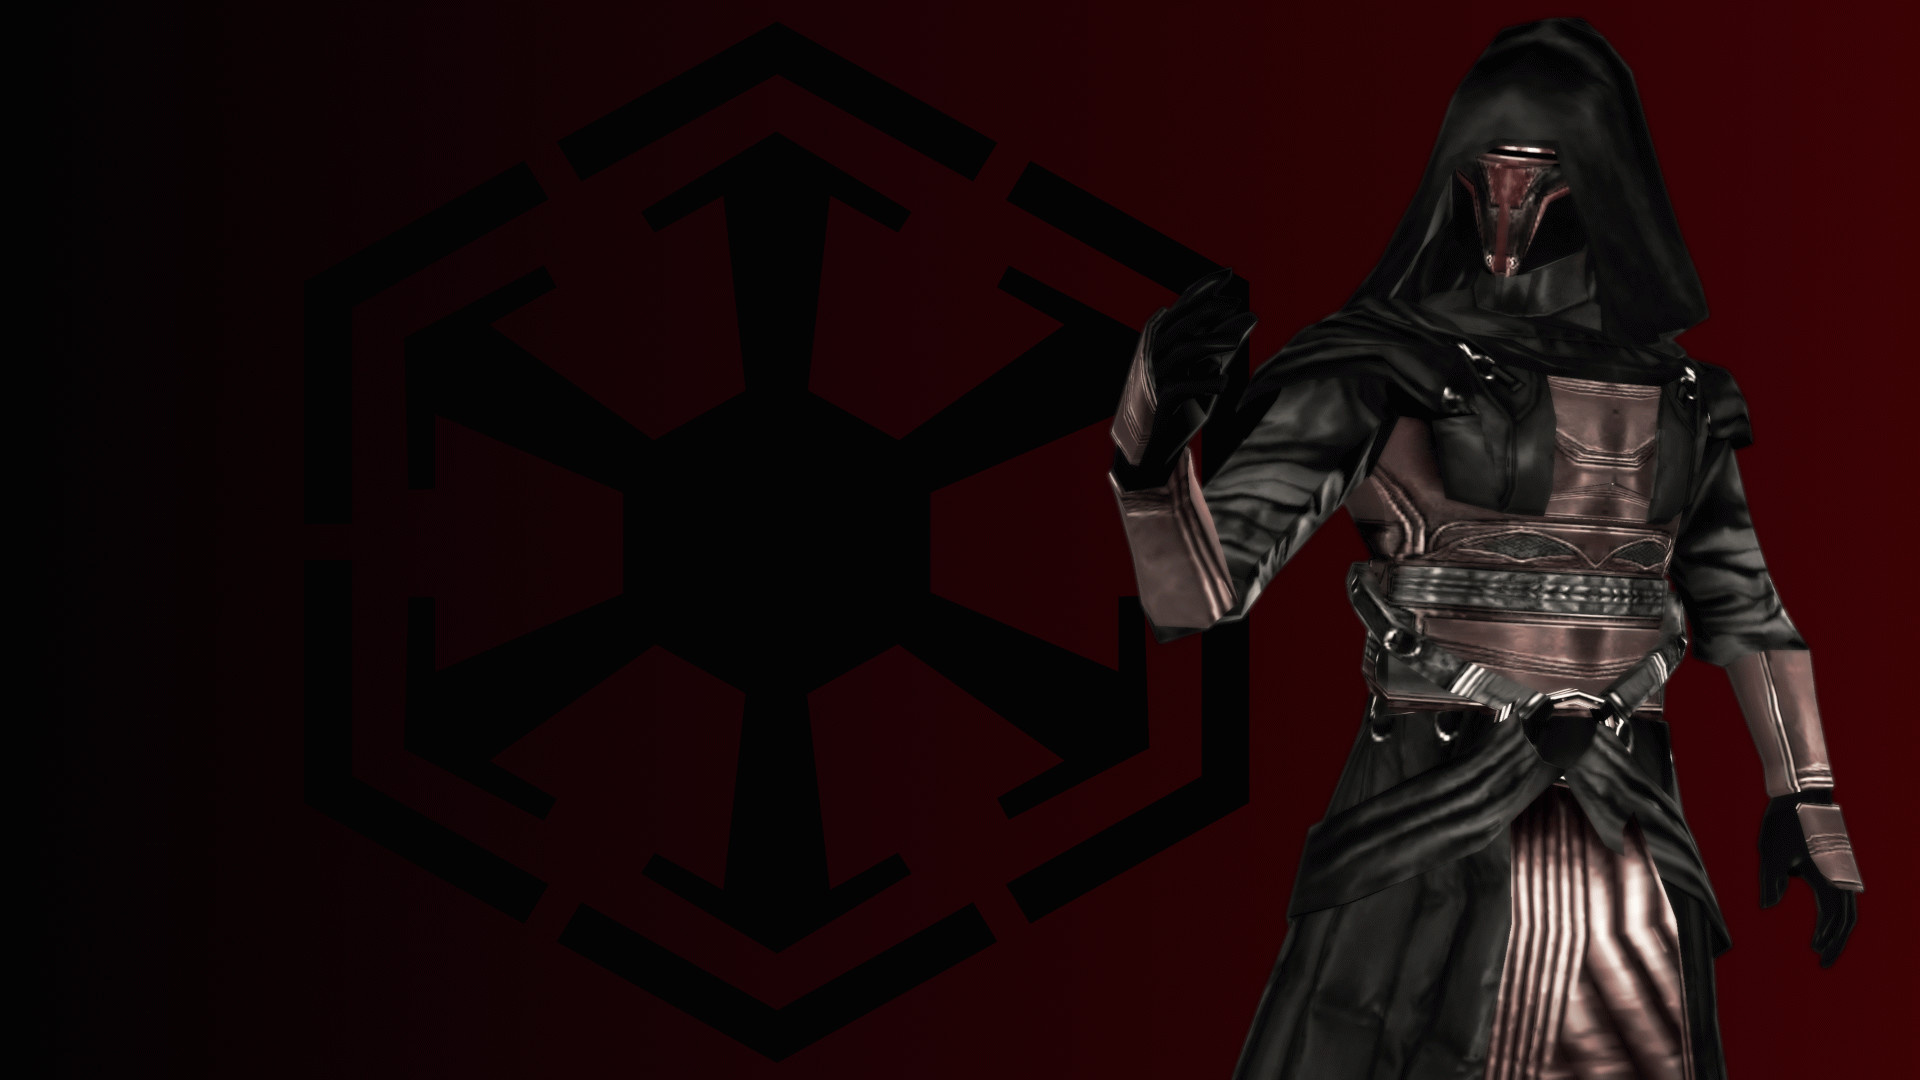 Revan wallpapers, Fan art collection, John Tremblay's creations, Sith Lord inspiration, 1920x1080 Full HD Desktop